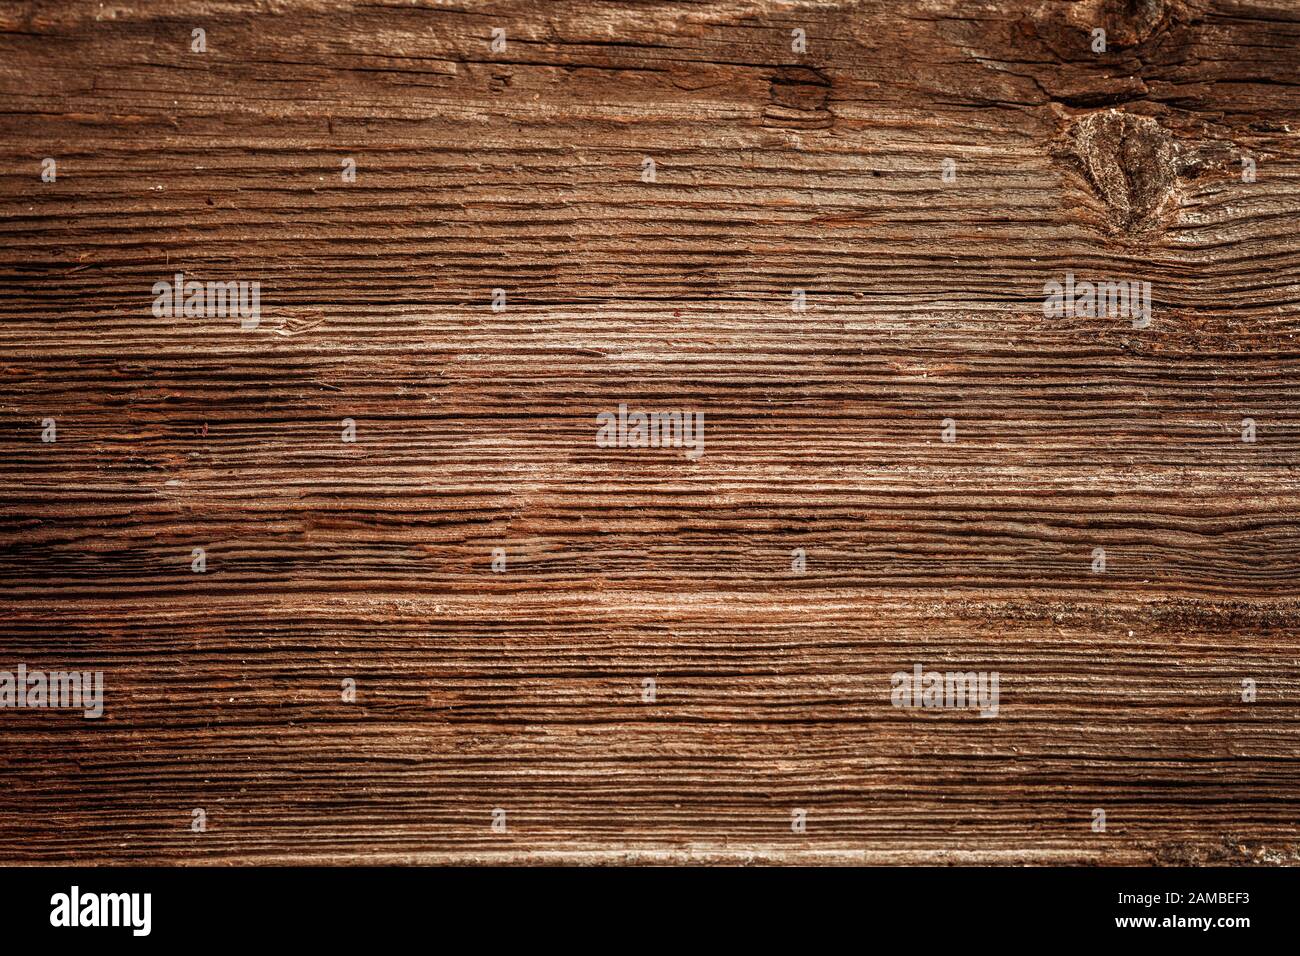 Brown unpainted natural wood with grains for background and texture Stock Photo